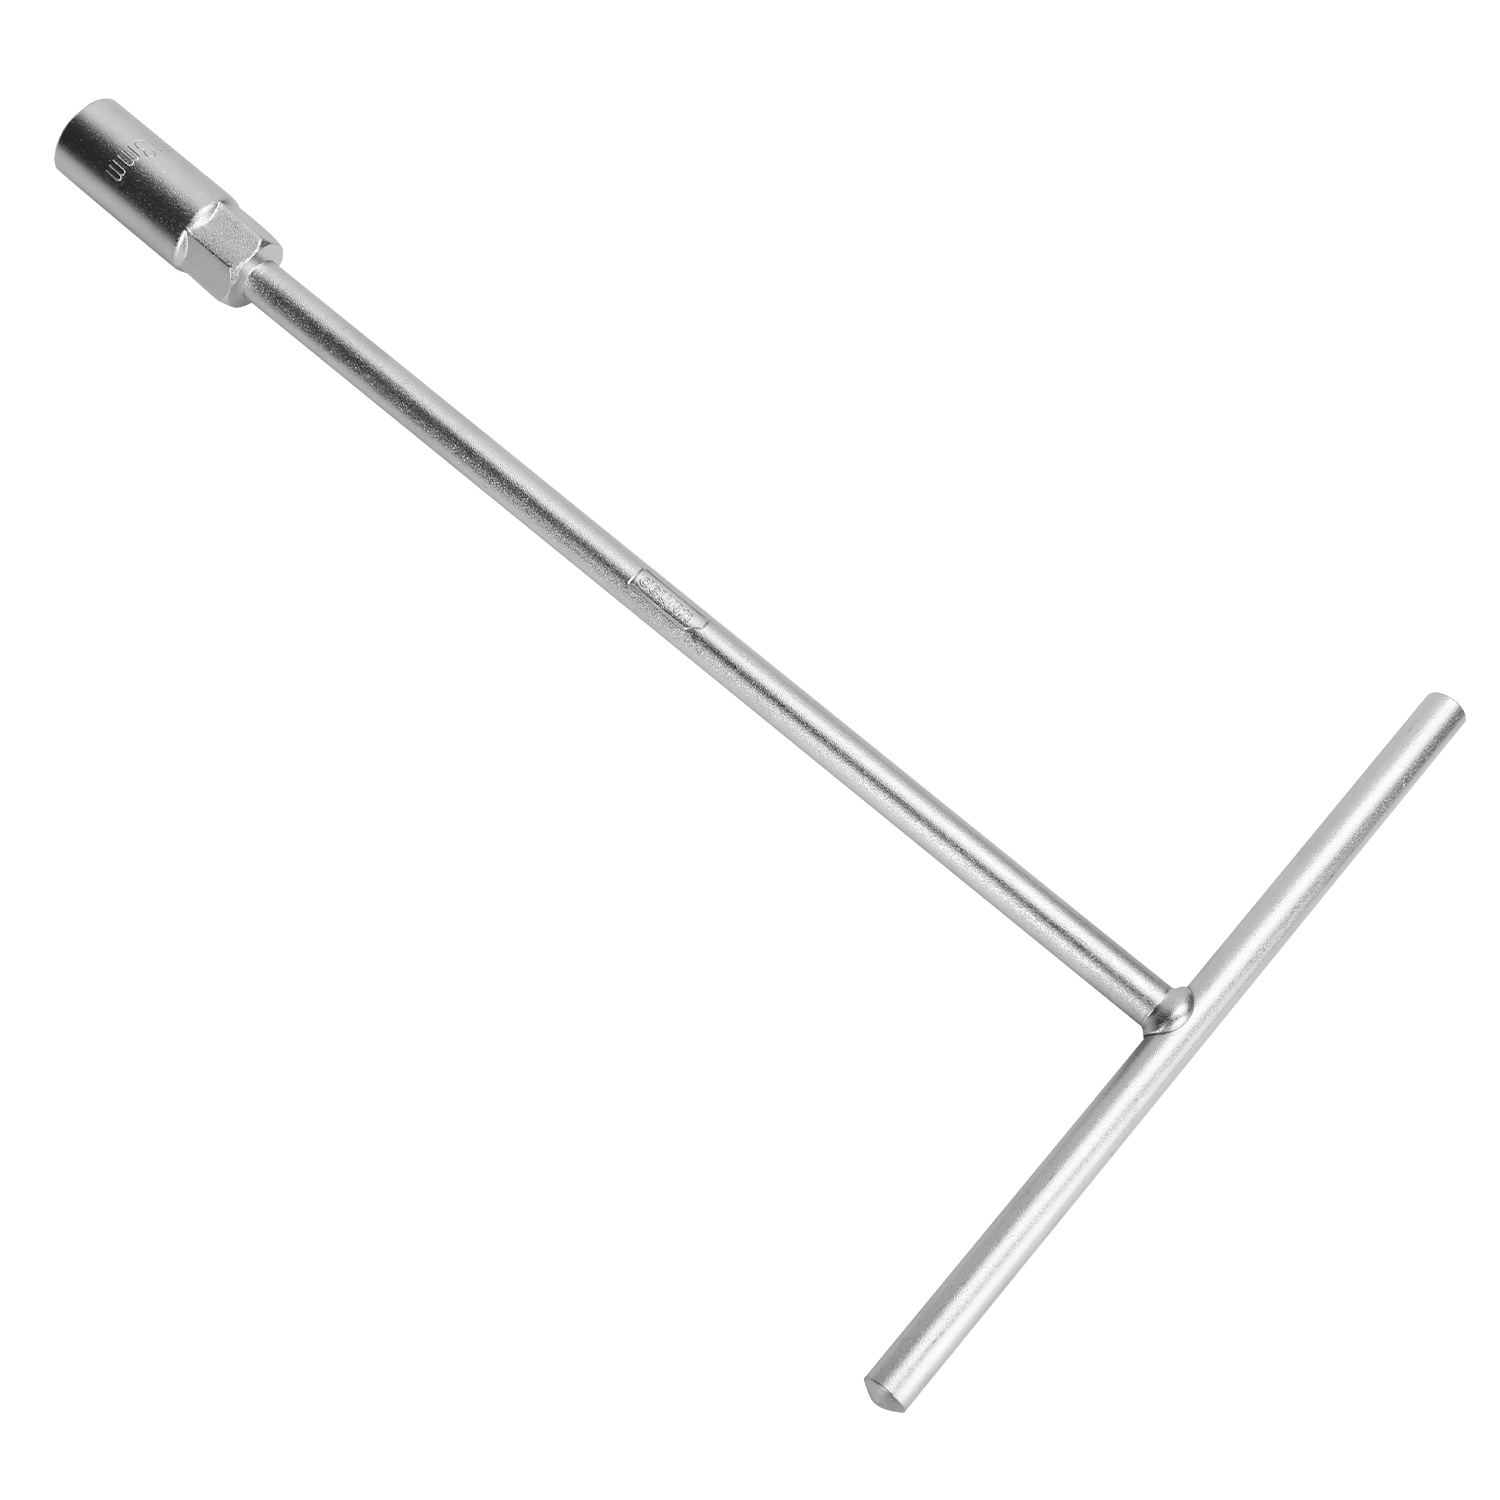 13mm T-Handle socket wrench